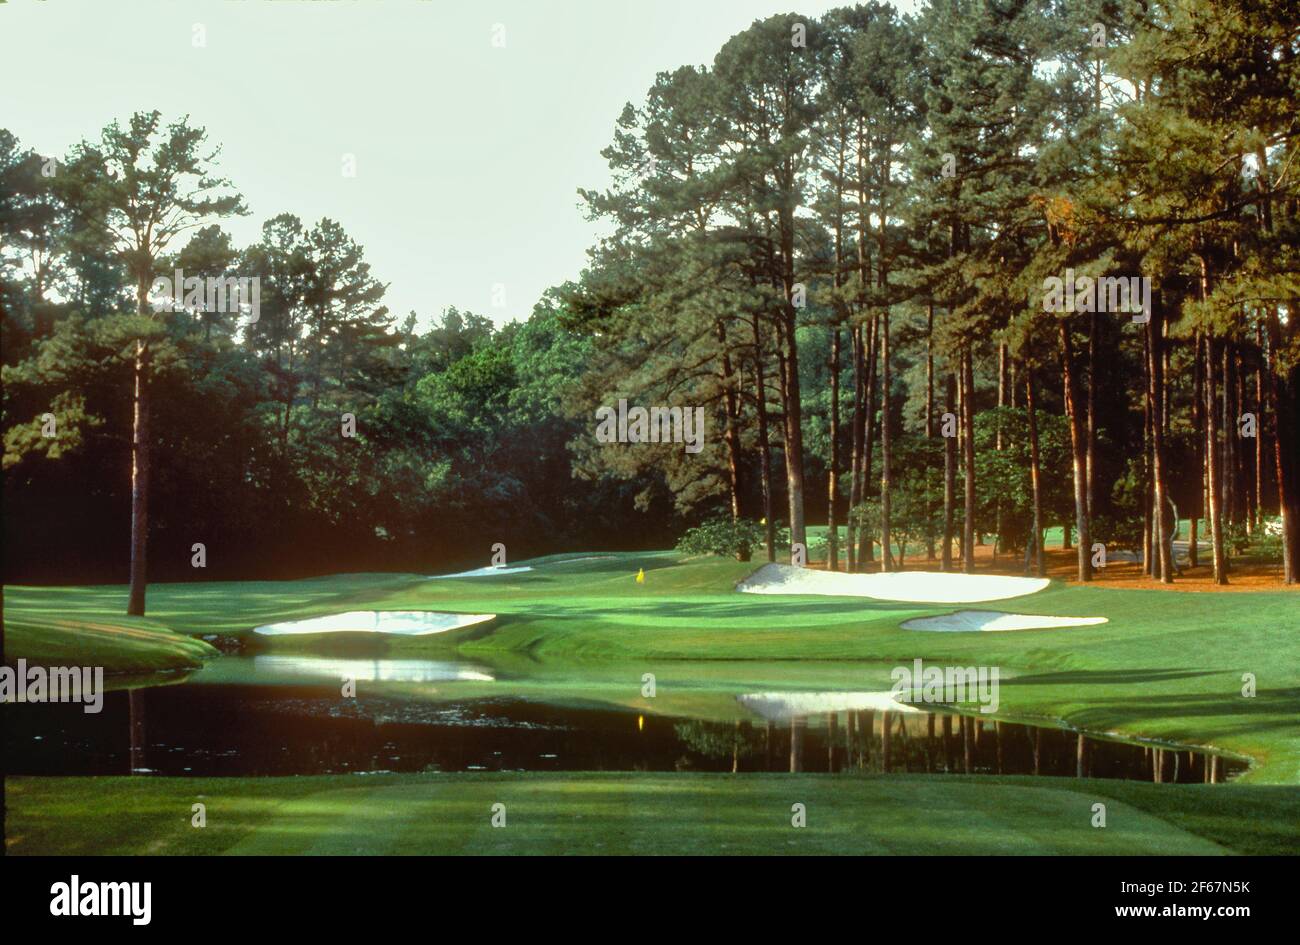 Augusta Golf Club 16th High Resolution Stock Photography and Images - Alamy